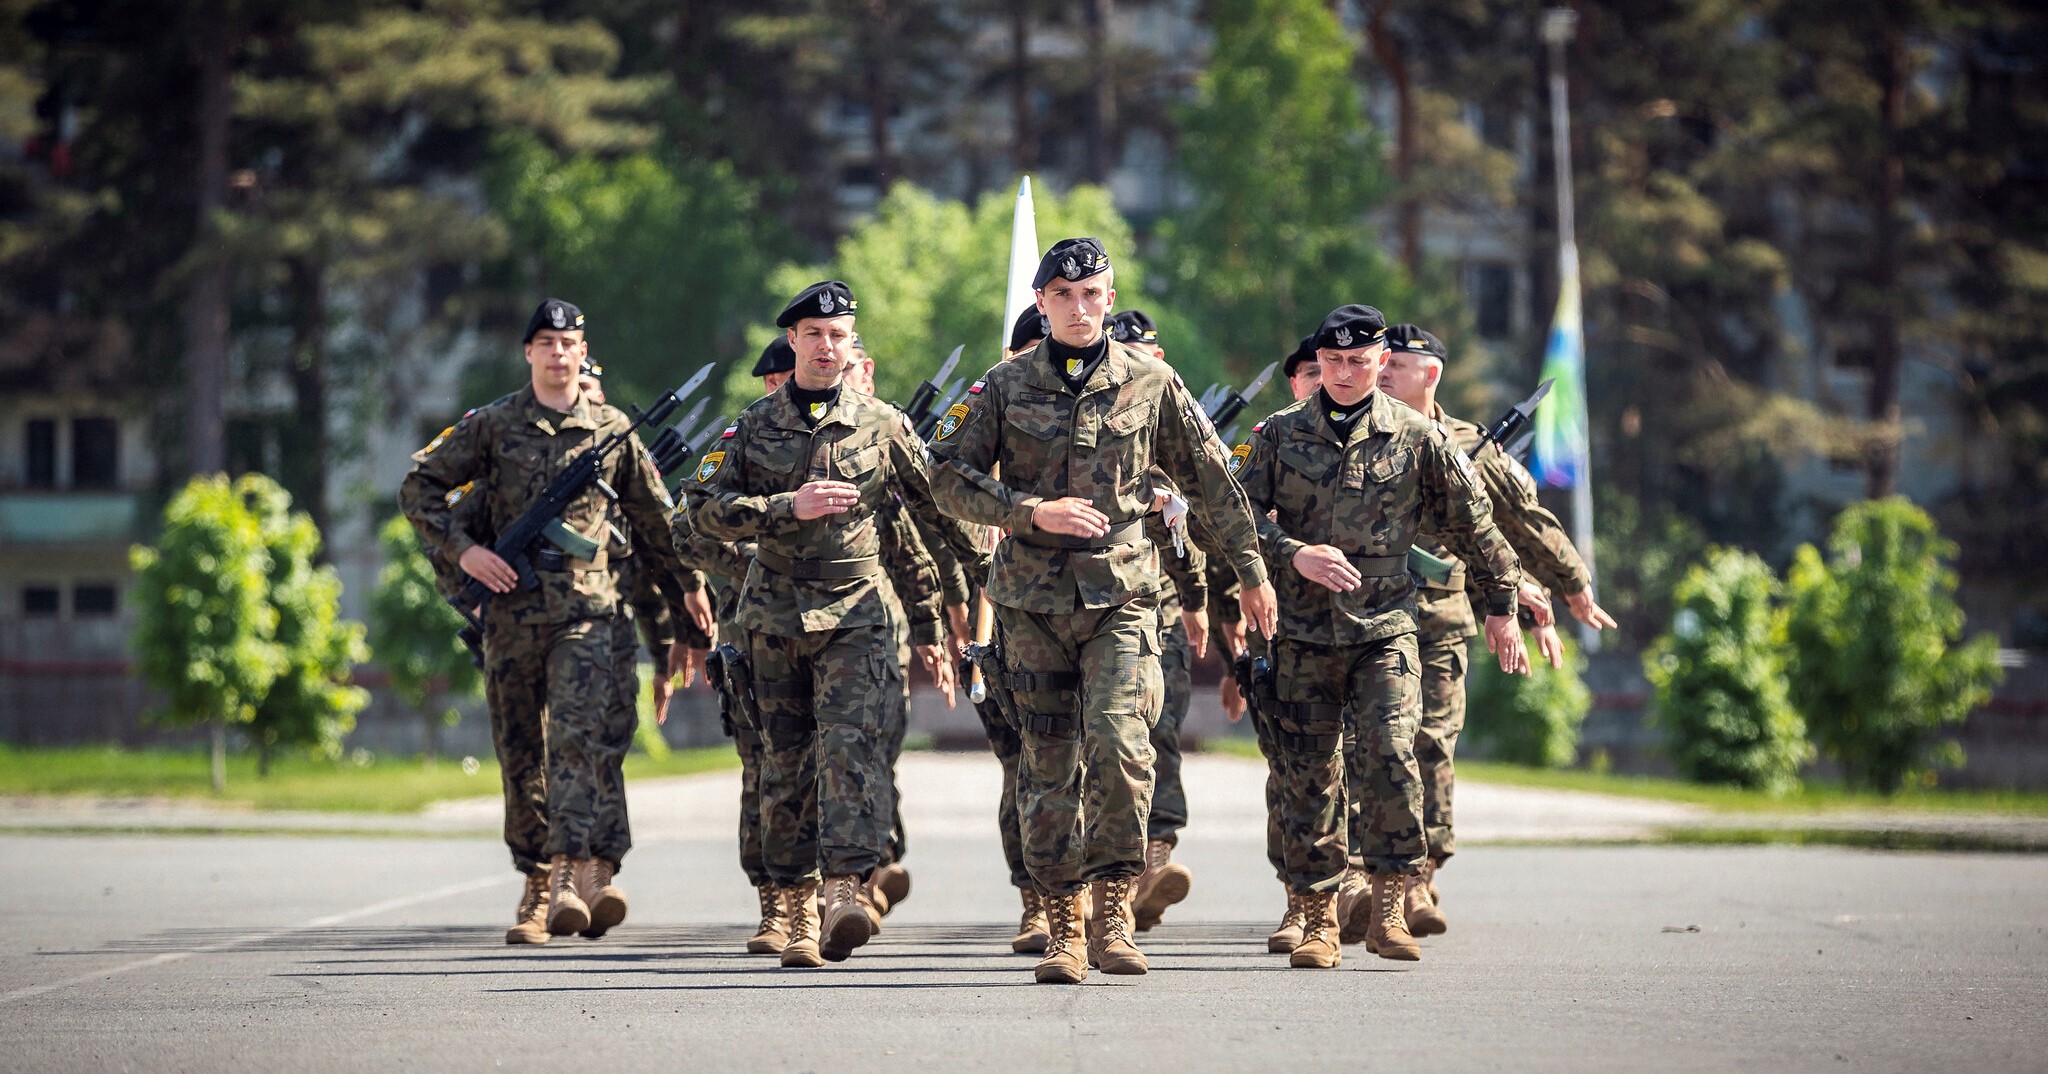 Over half of Poles want military service restored but most opposed to  loosening gun laws